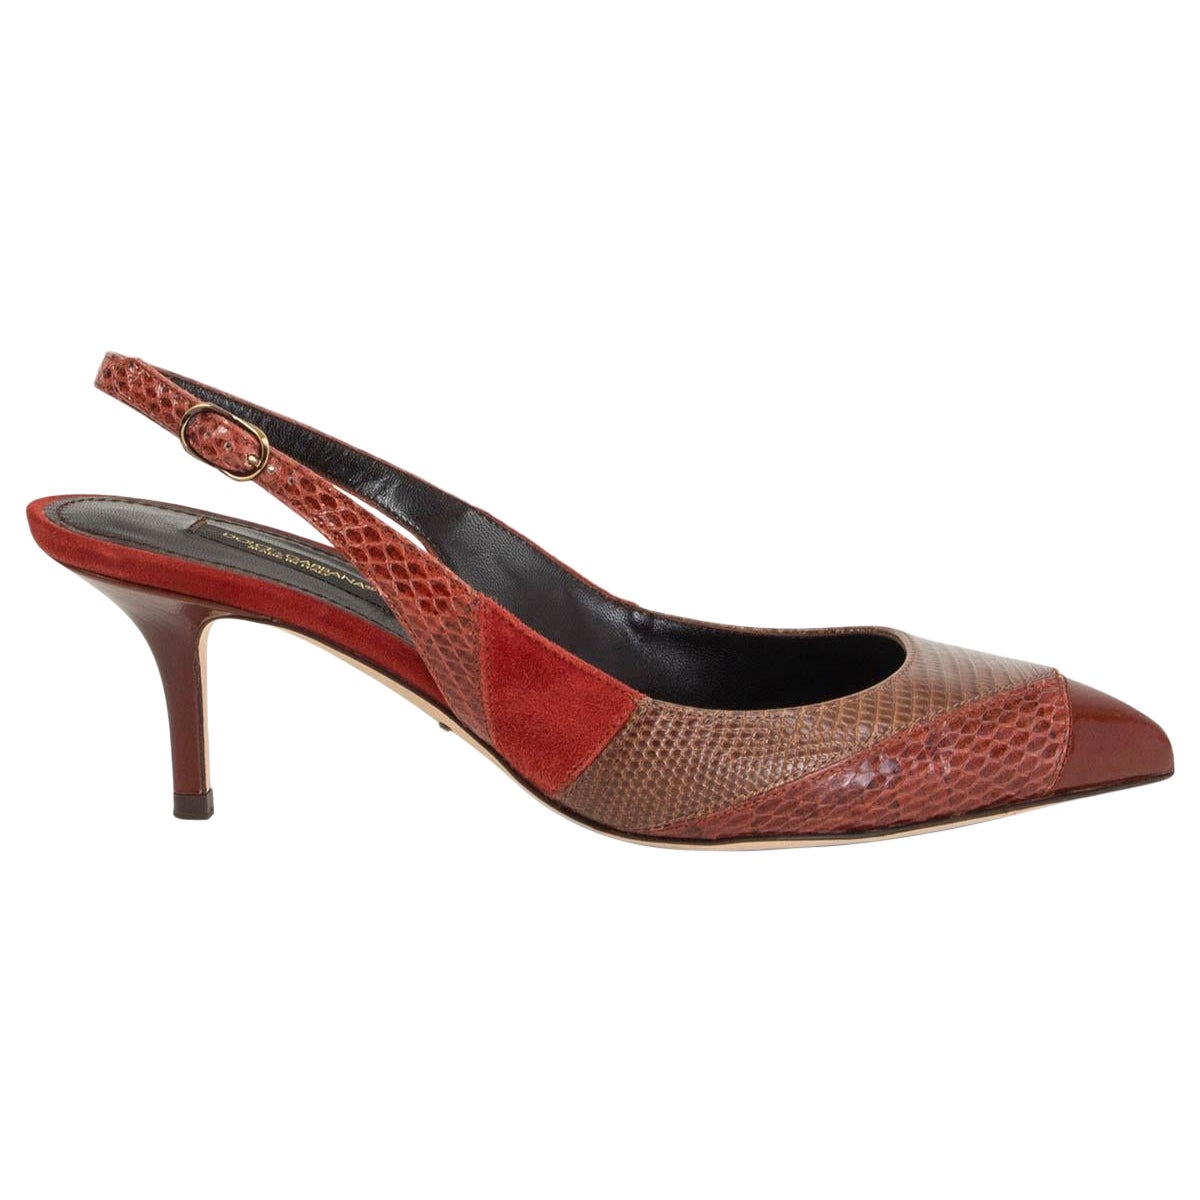 DOLCE & GABBANA red Snakeskin Lizard PATCHWORK POINTED TOE Pumps Shoes 36.5 For Sale